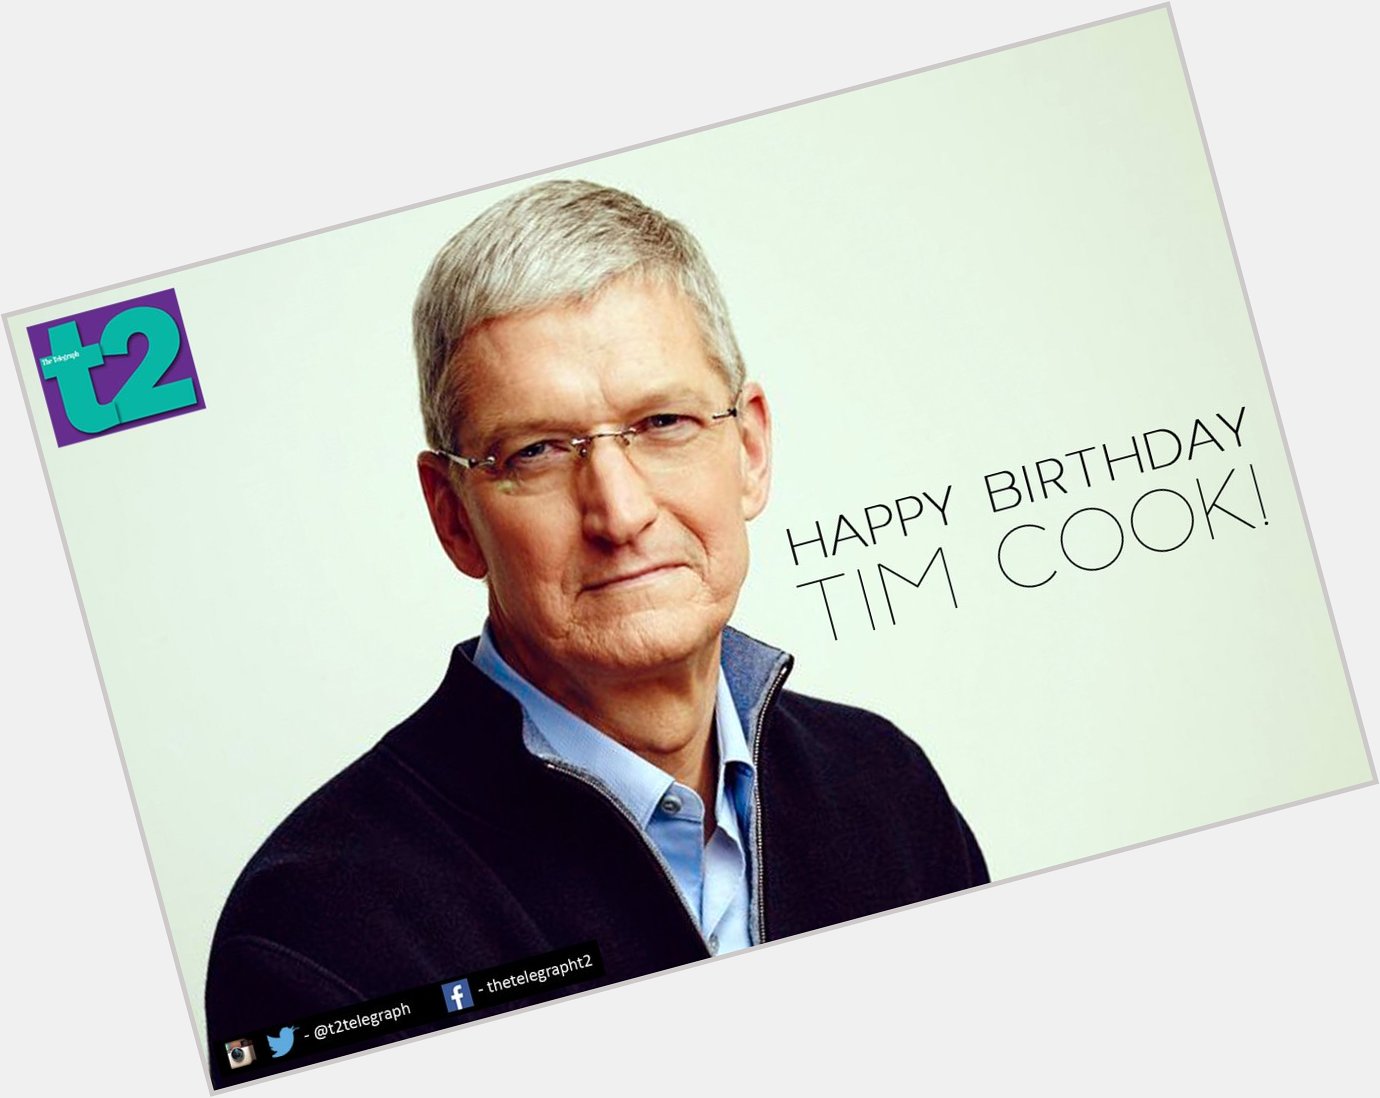 He hikes through Yosemite National Park. He rocks to 1960s music. And he\s Apple CEO. Happy birthday Tim Cook! 